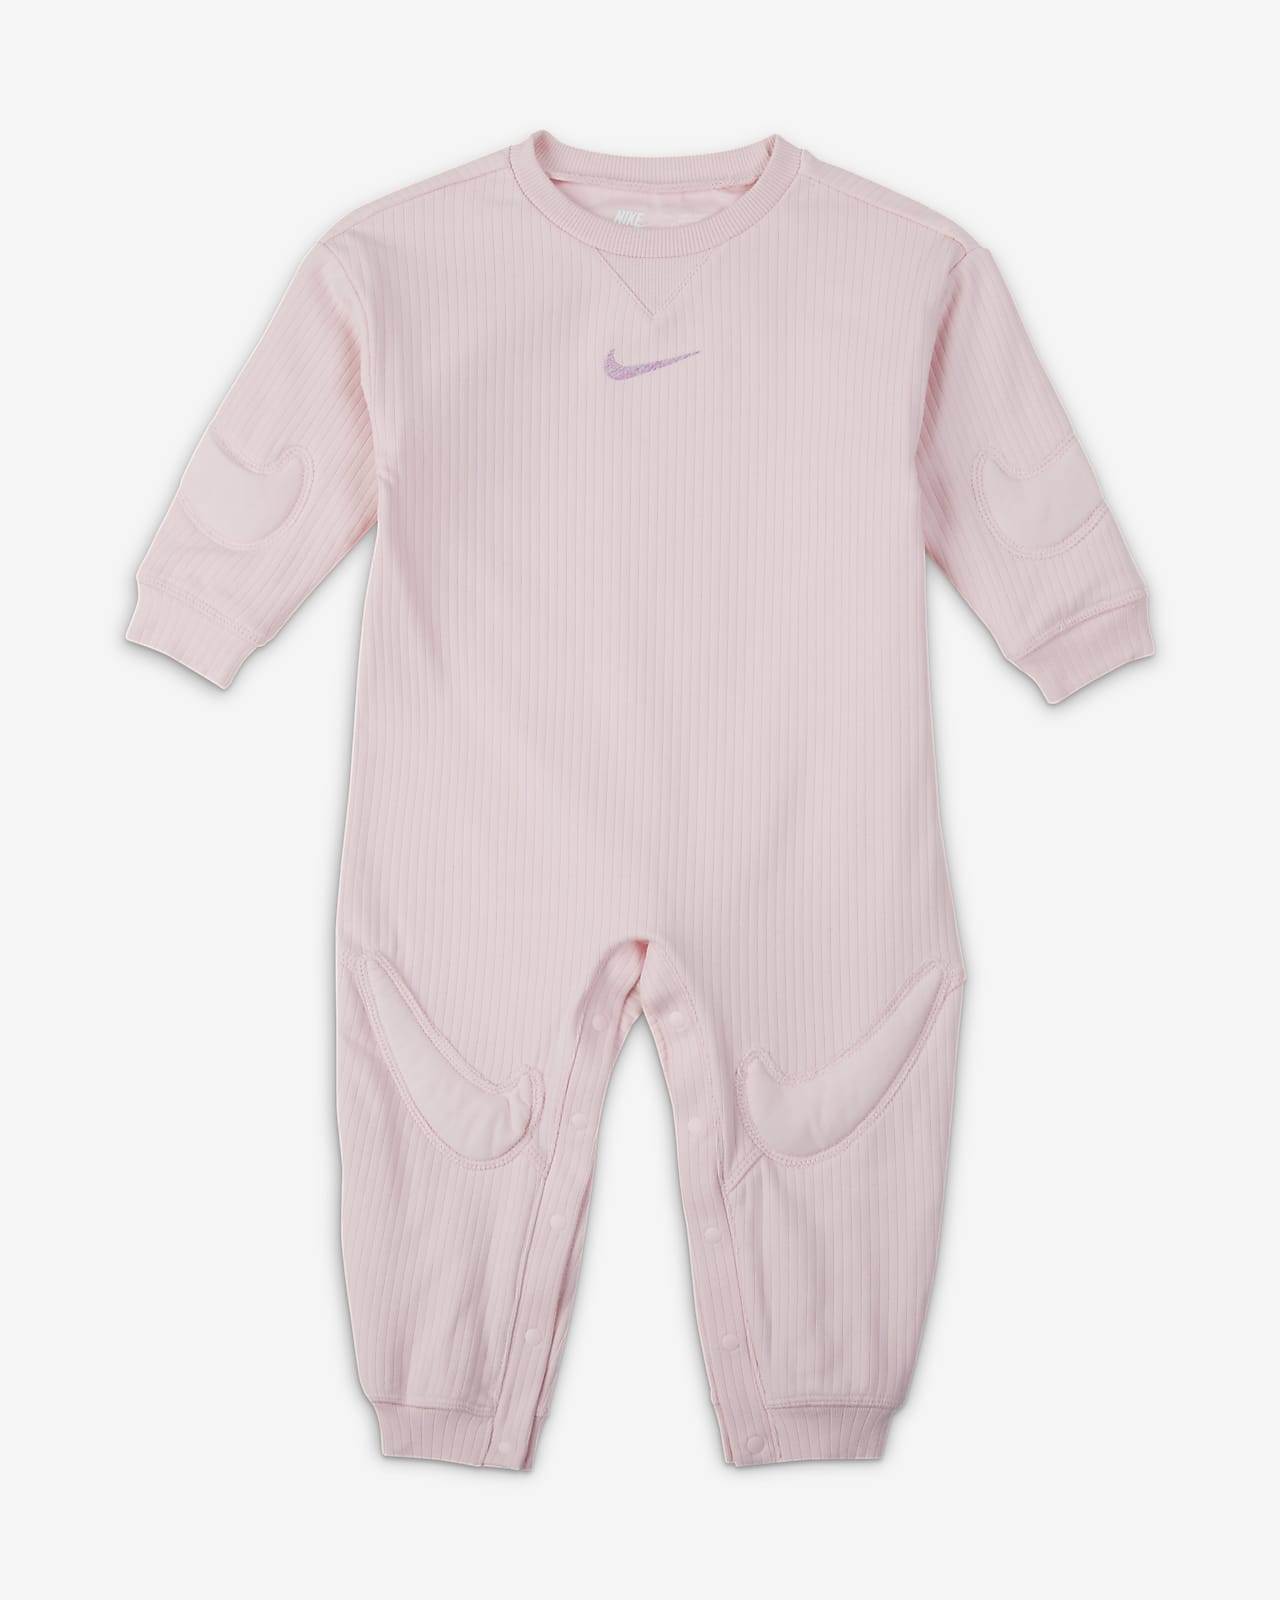 Nike ReadySet Baby Coveralls